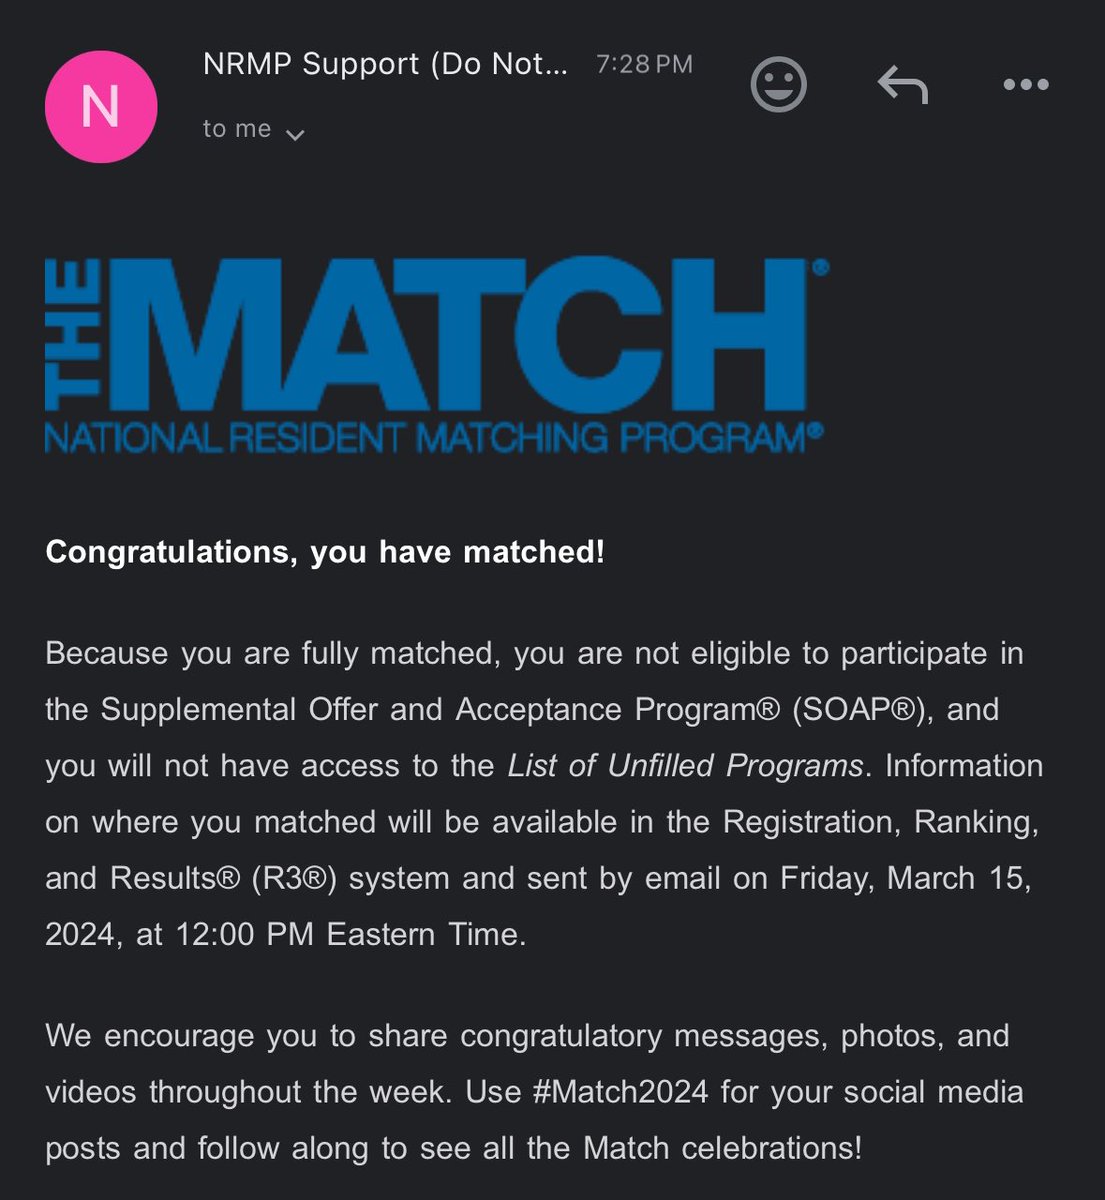 Thrilled to announce I’ve matched into residency! Huge thanks to my mentors for their invaluable support and guidance. #Match2024 #IMProud